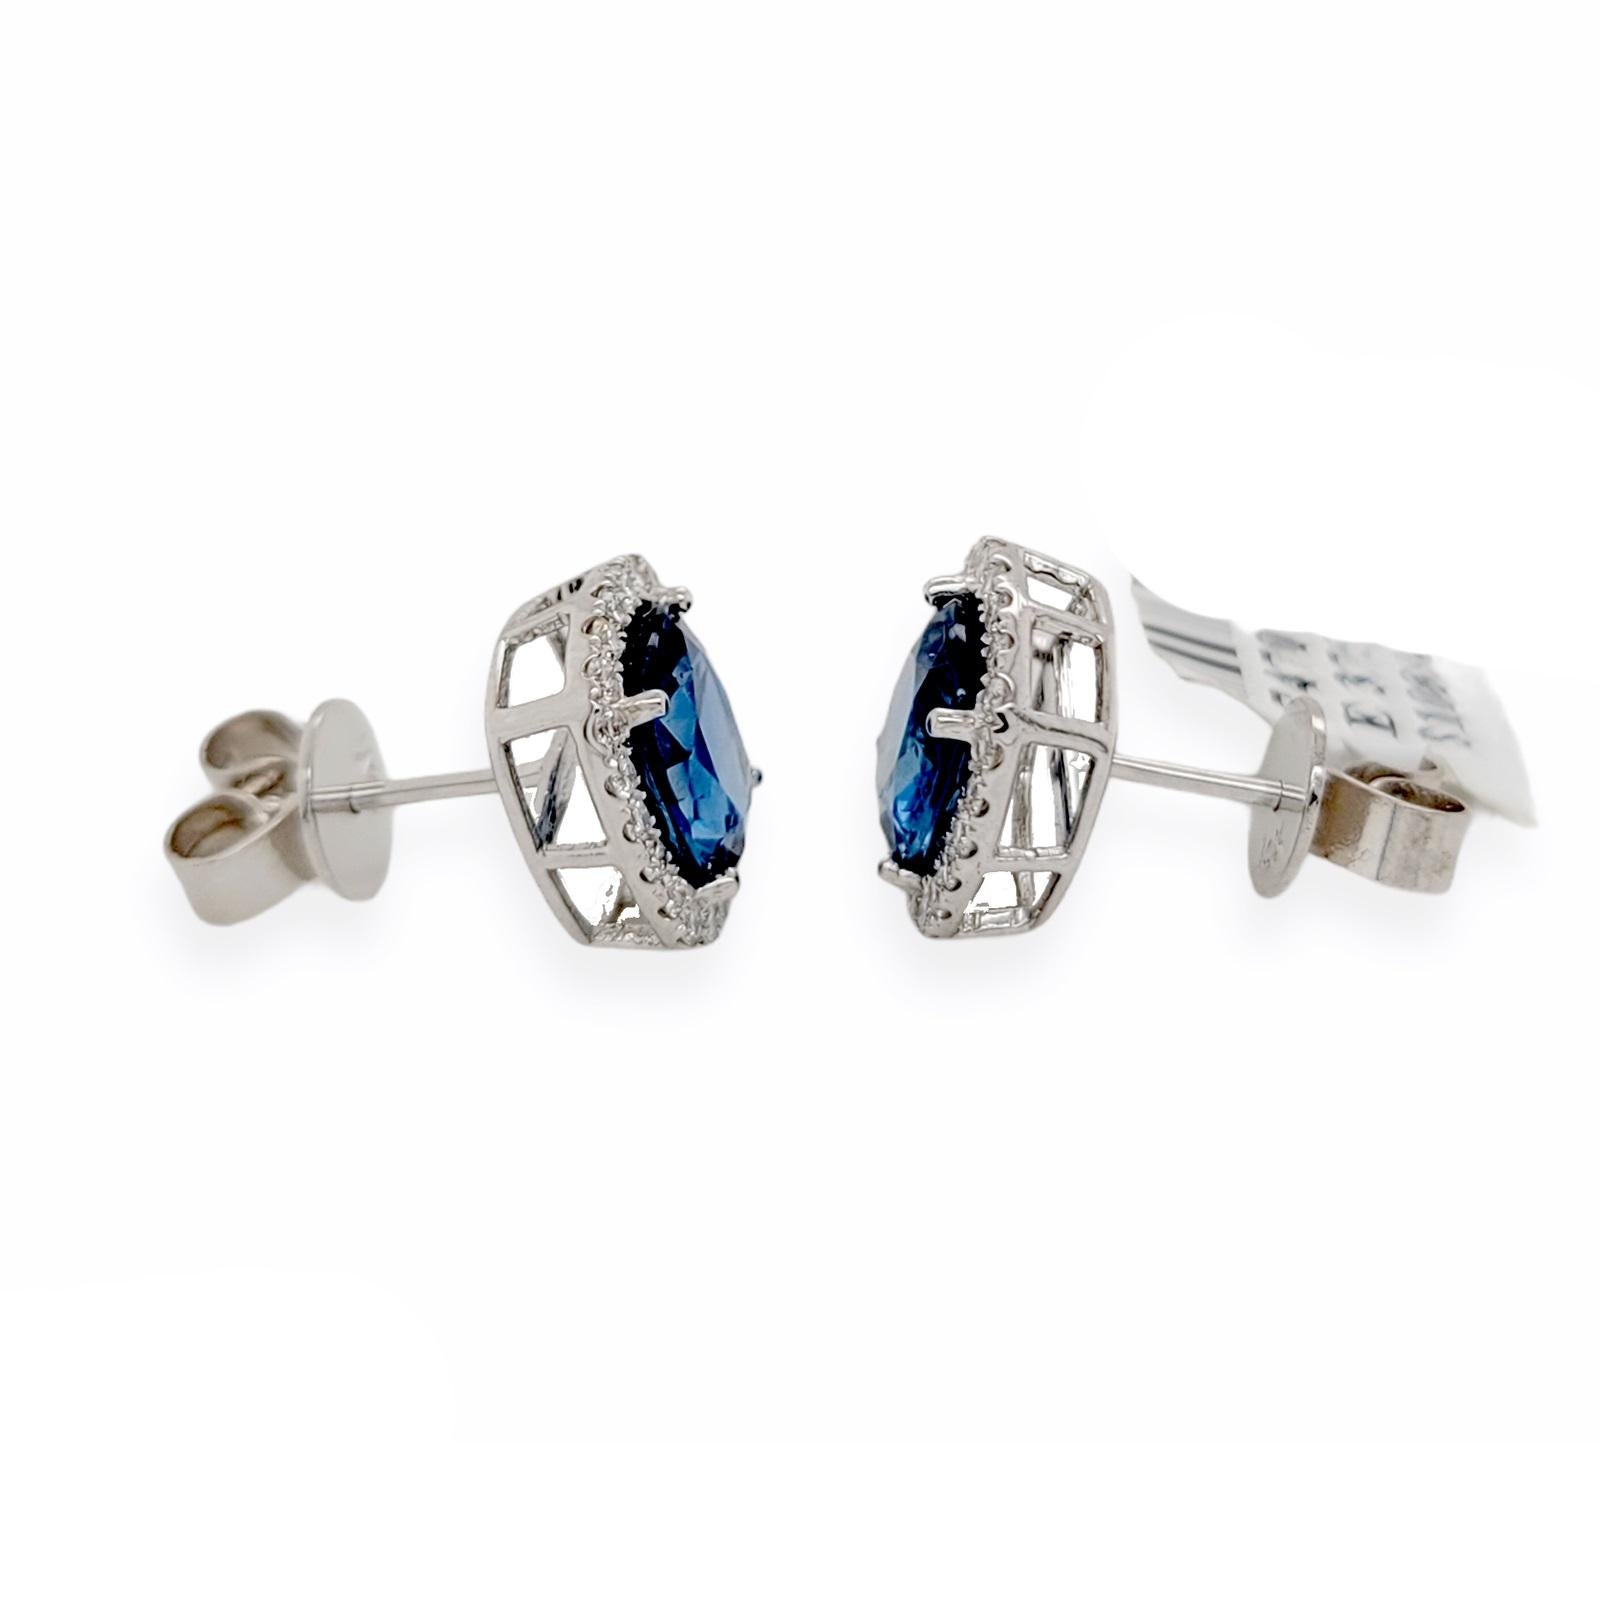 3.84 CT Natural Blue Sapphire & 0.52 CT Diamonds 14K White Gold Stud Earrings In Excellent Condition For Sale In Los Angeles, CA